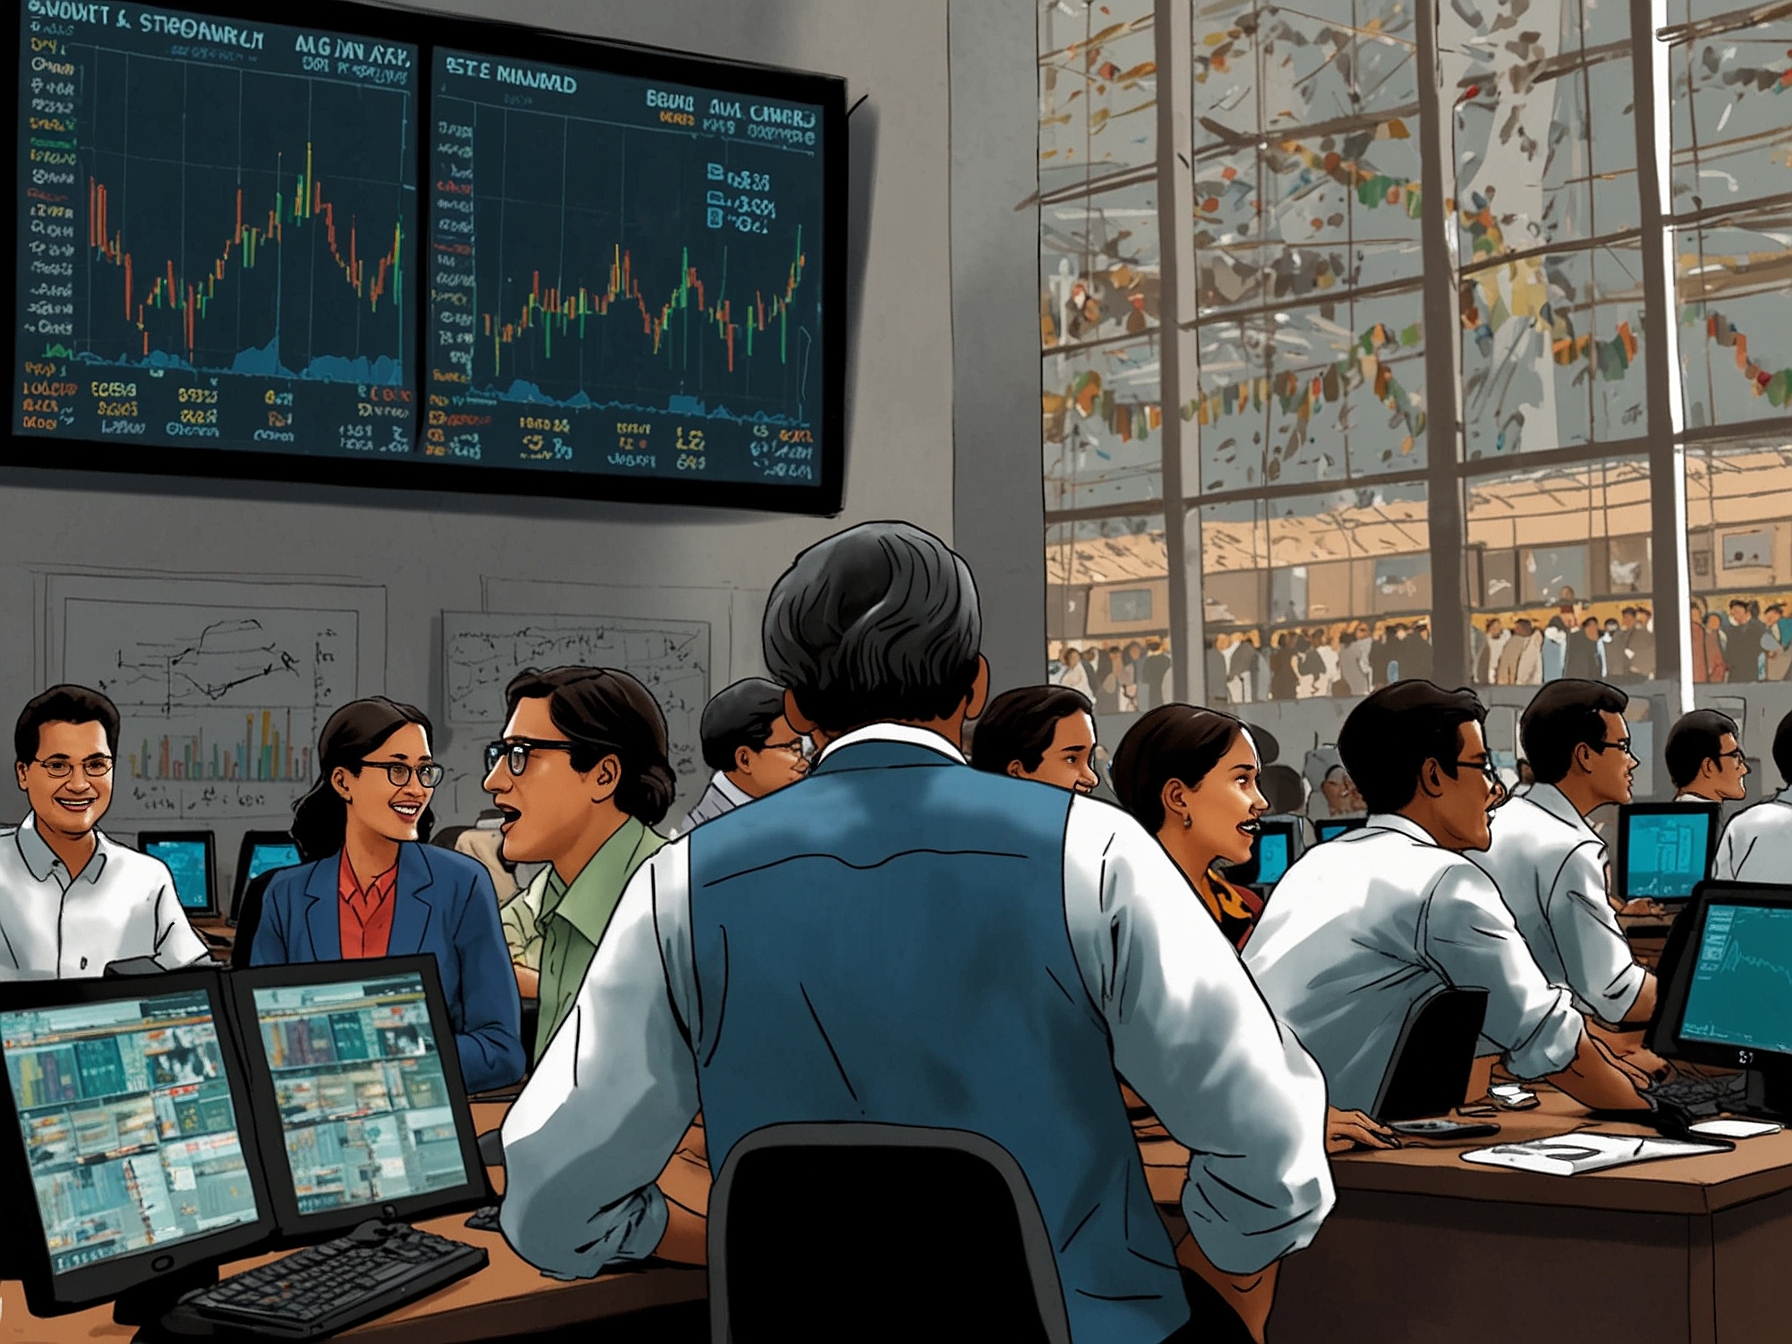 Investors celebrating in a busy trading room as the NSE Nifty hits an all-time high, with screens displaying rising stock prices of major private banks such as ICICI Bank and HDFC Bank.